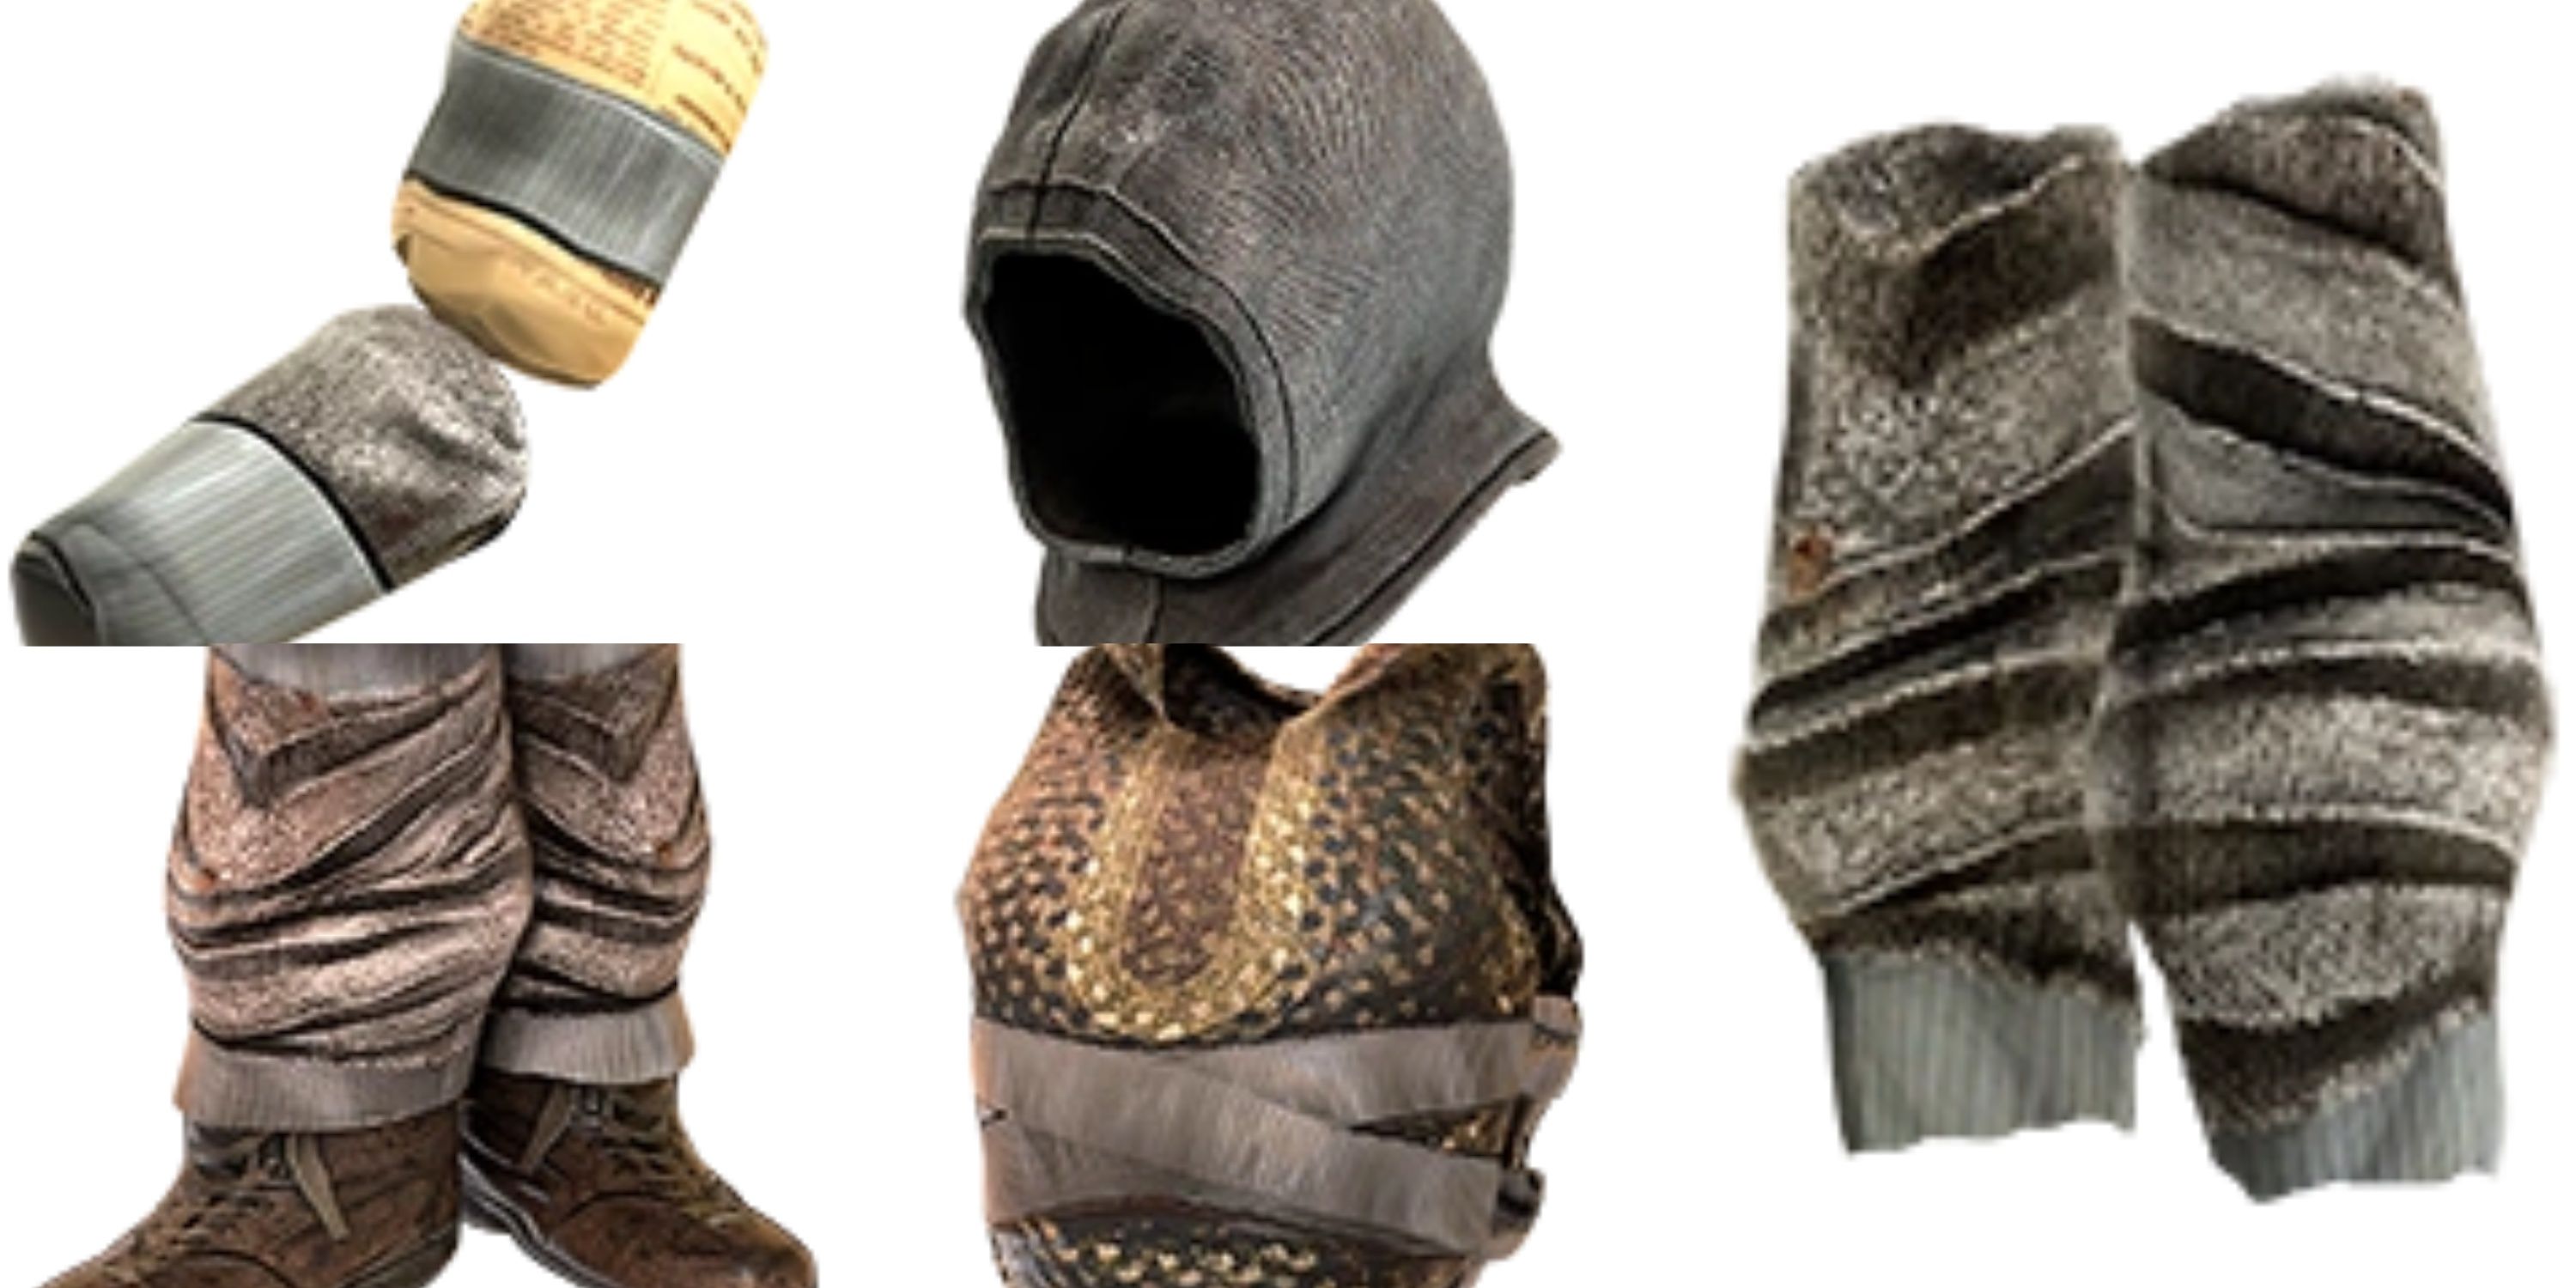 For early gameplay, crafting padded armor is an easy and cheap way to protect a player.